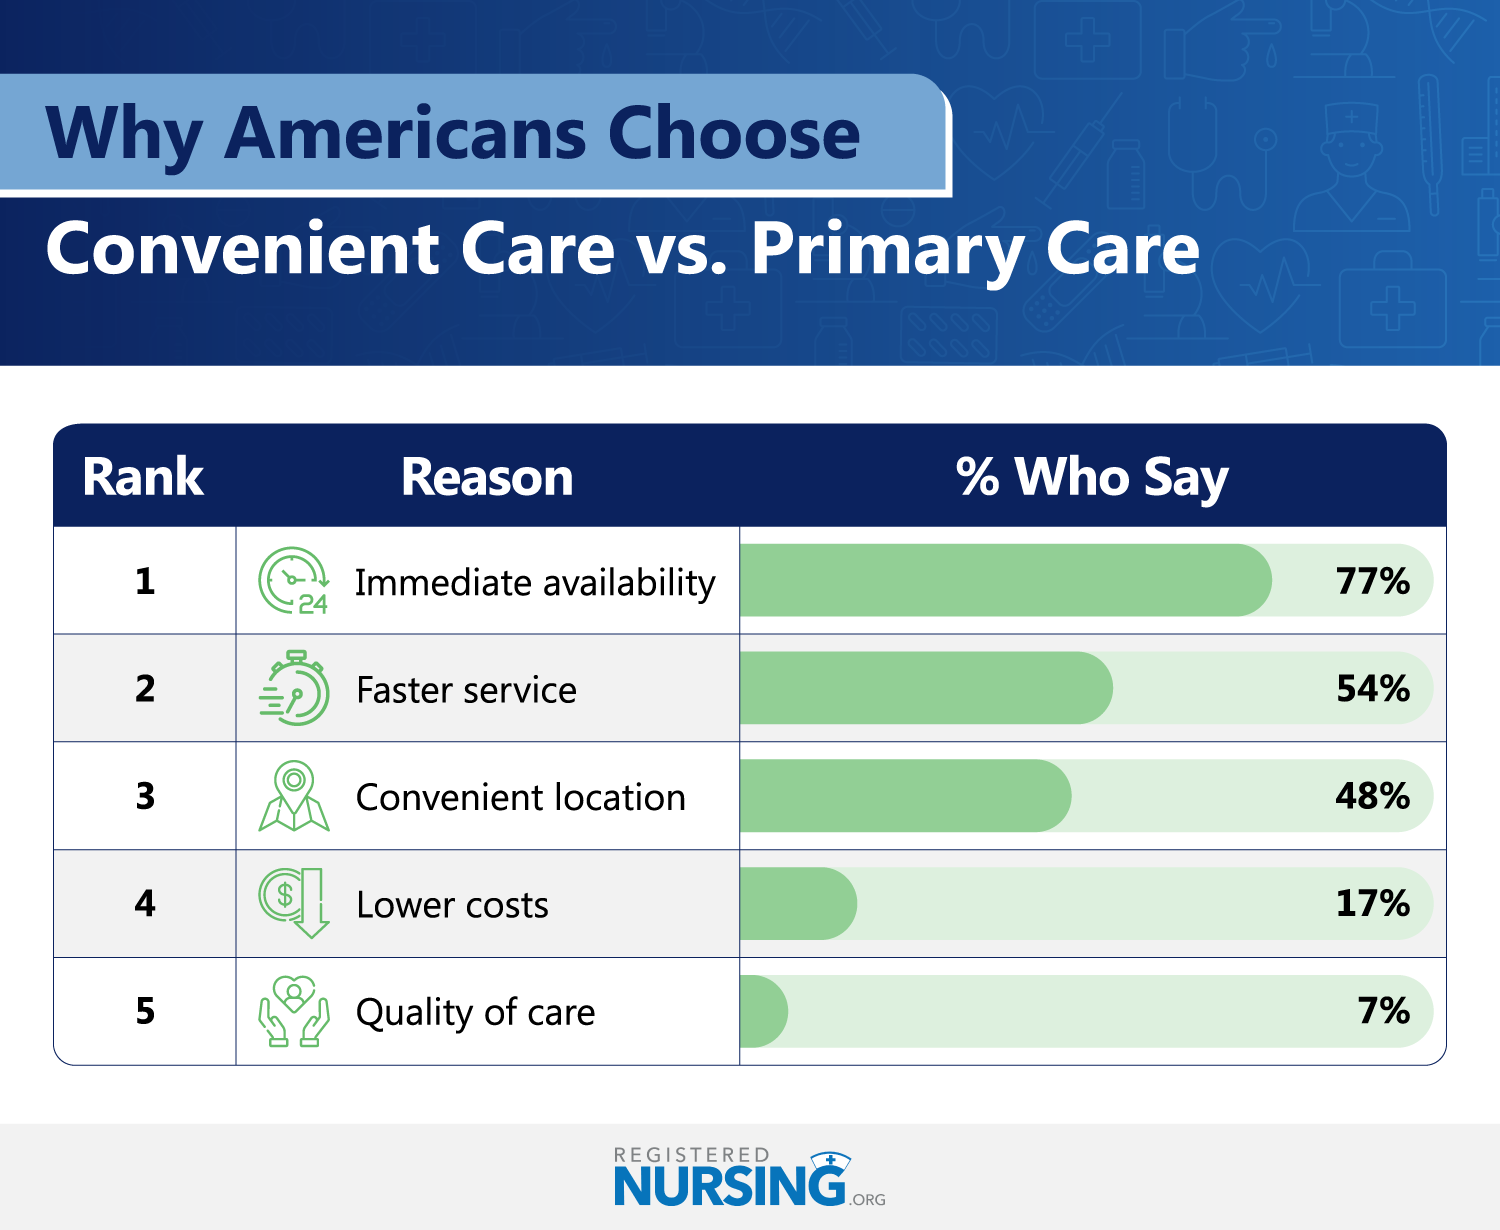 Bar chart showing the reasons Americans choose convenient care.